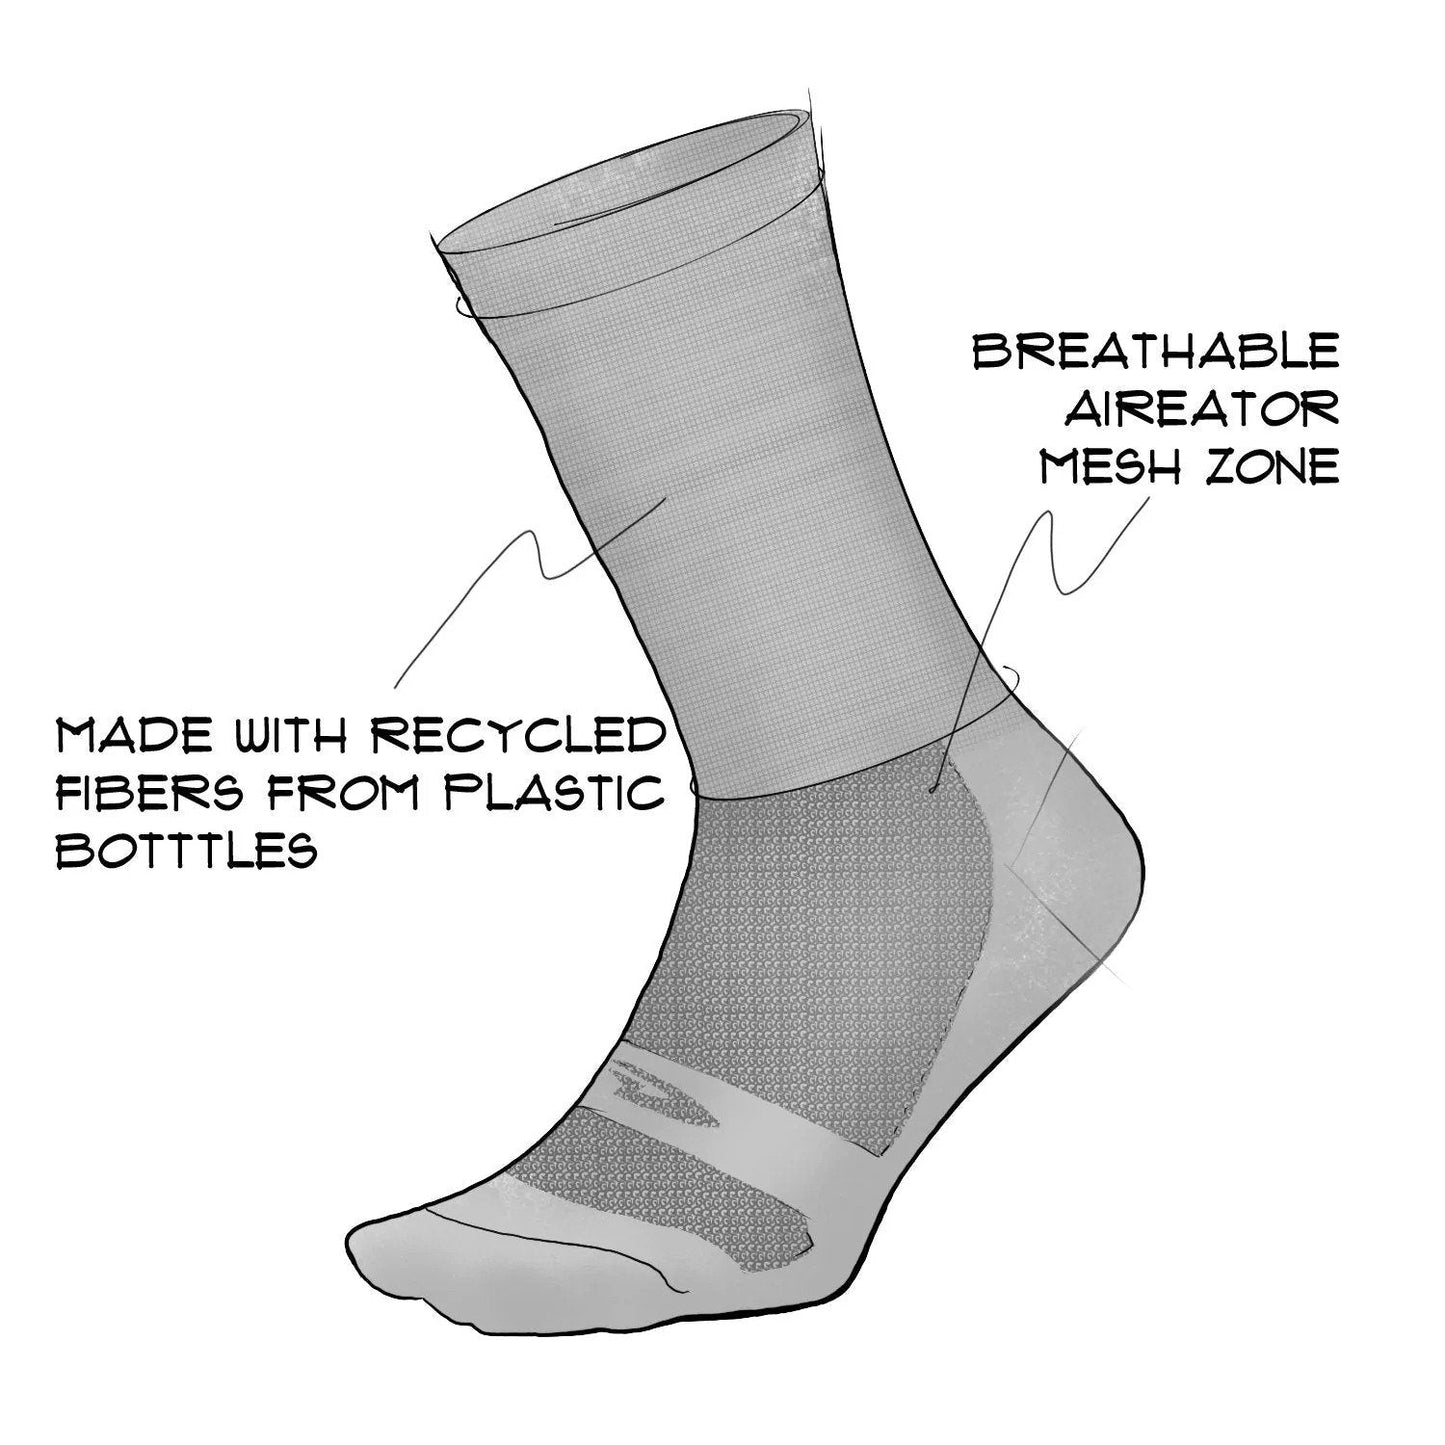 technical drawing of DeFeet Aireator showing features of recycled fiber and mesh construction